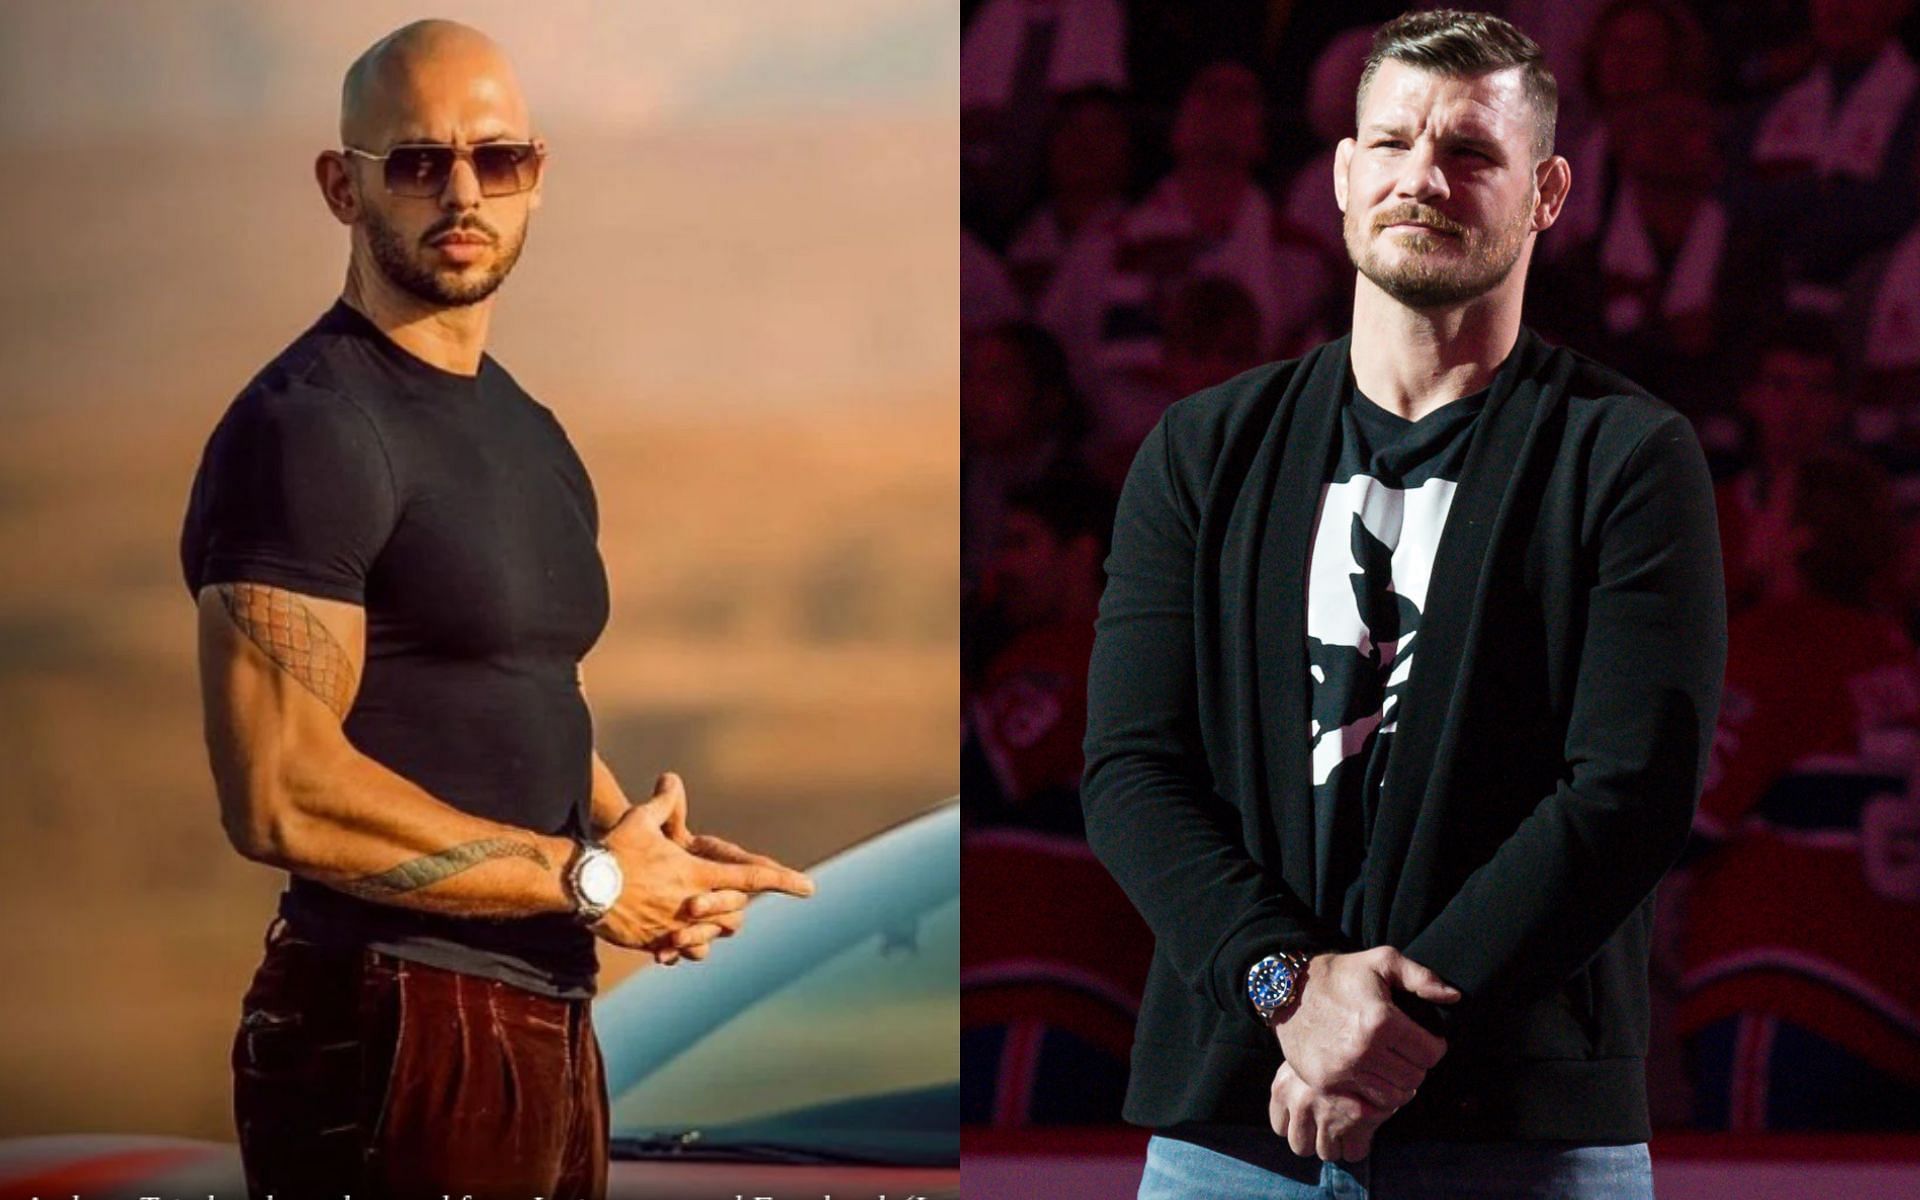 Andrew Tate (left), Michael Bisping (right) [Image courtesy of Andrew Tate/Instagram]